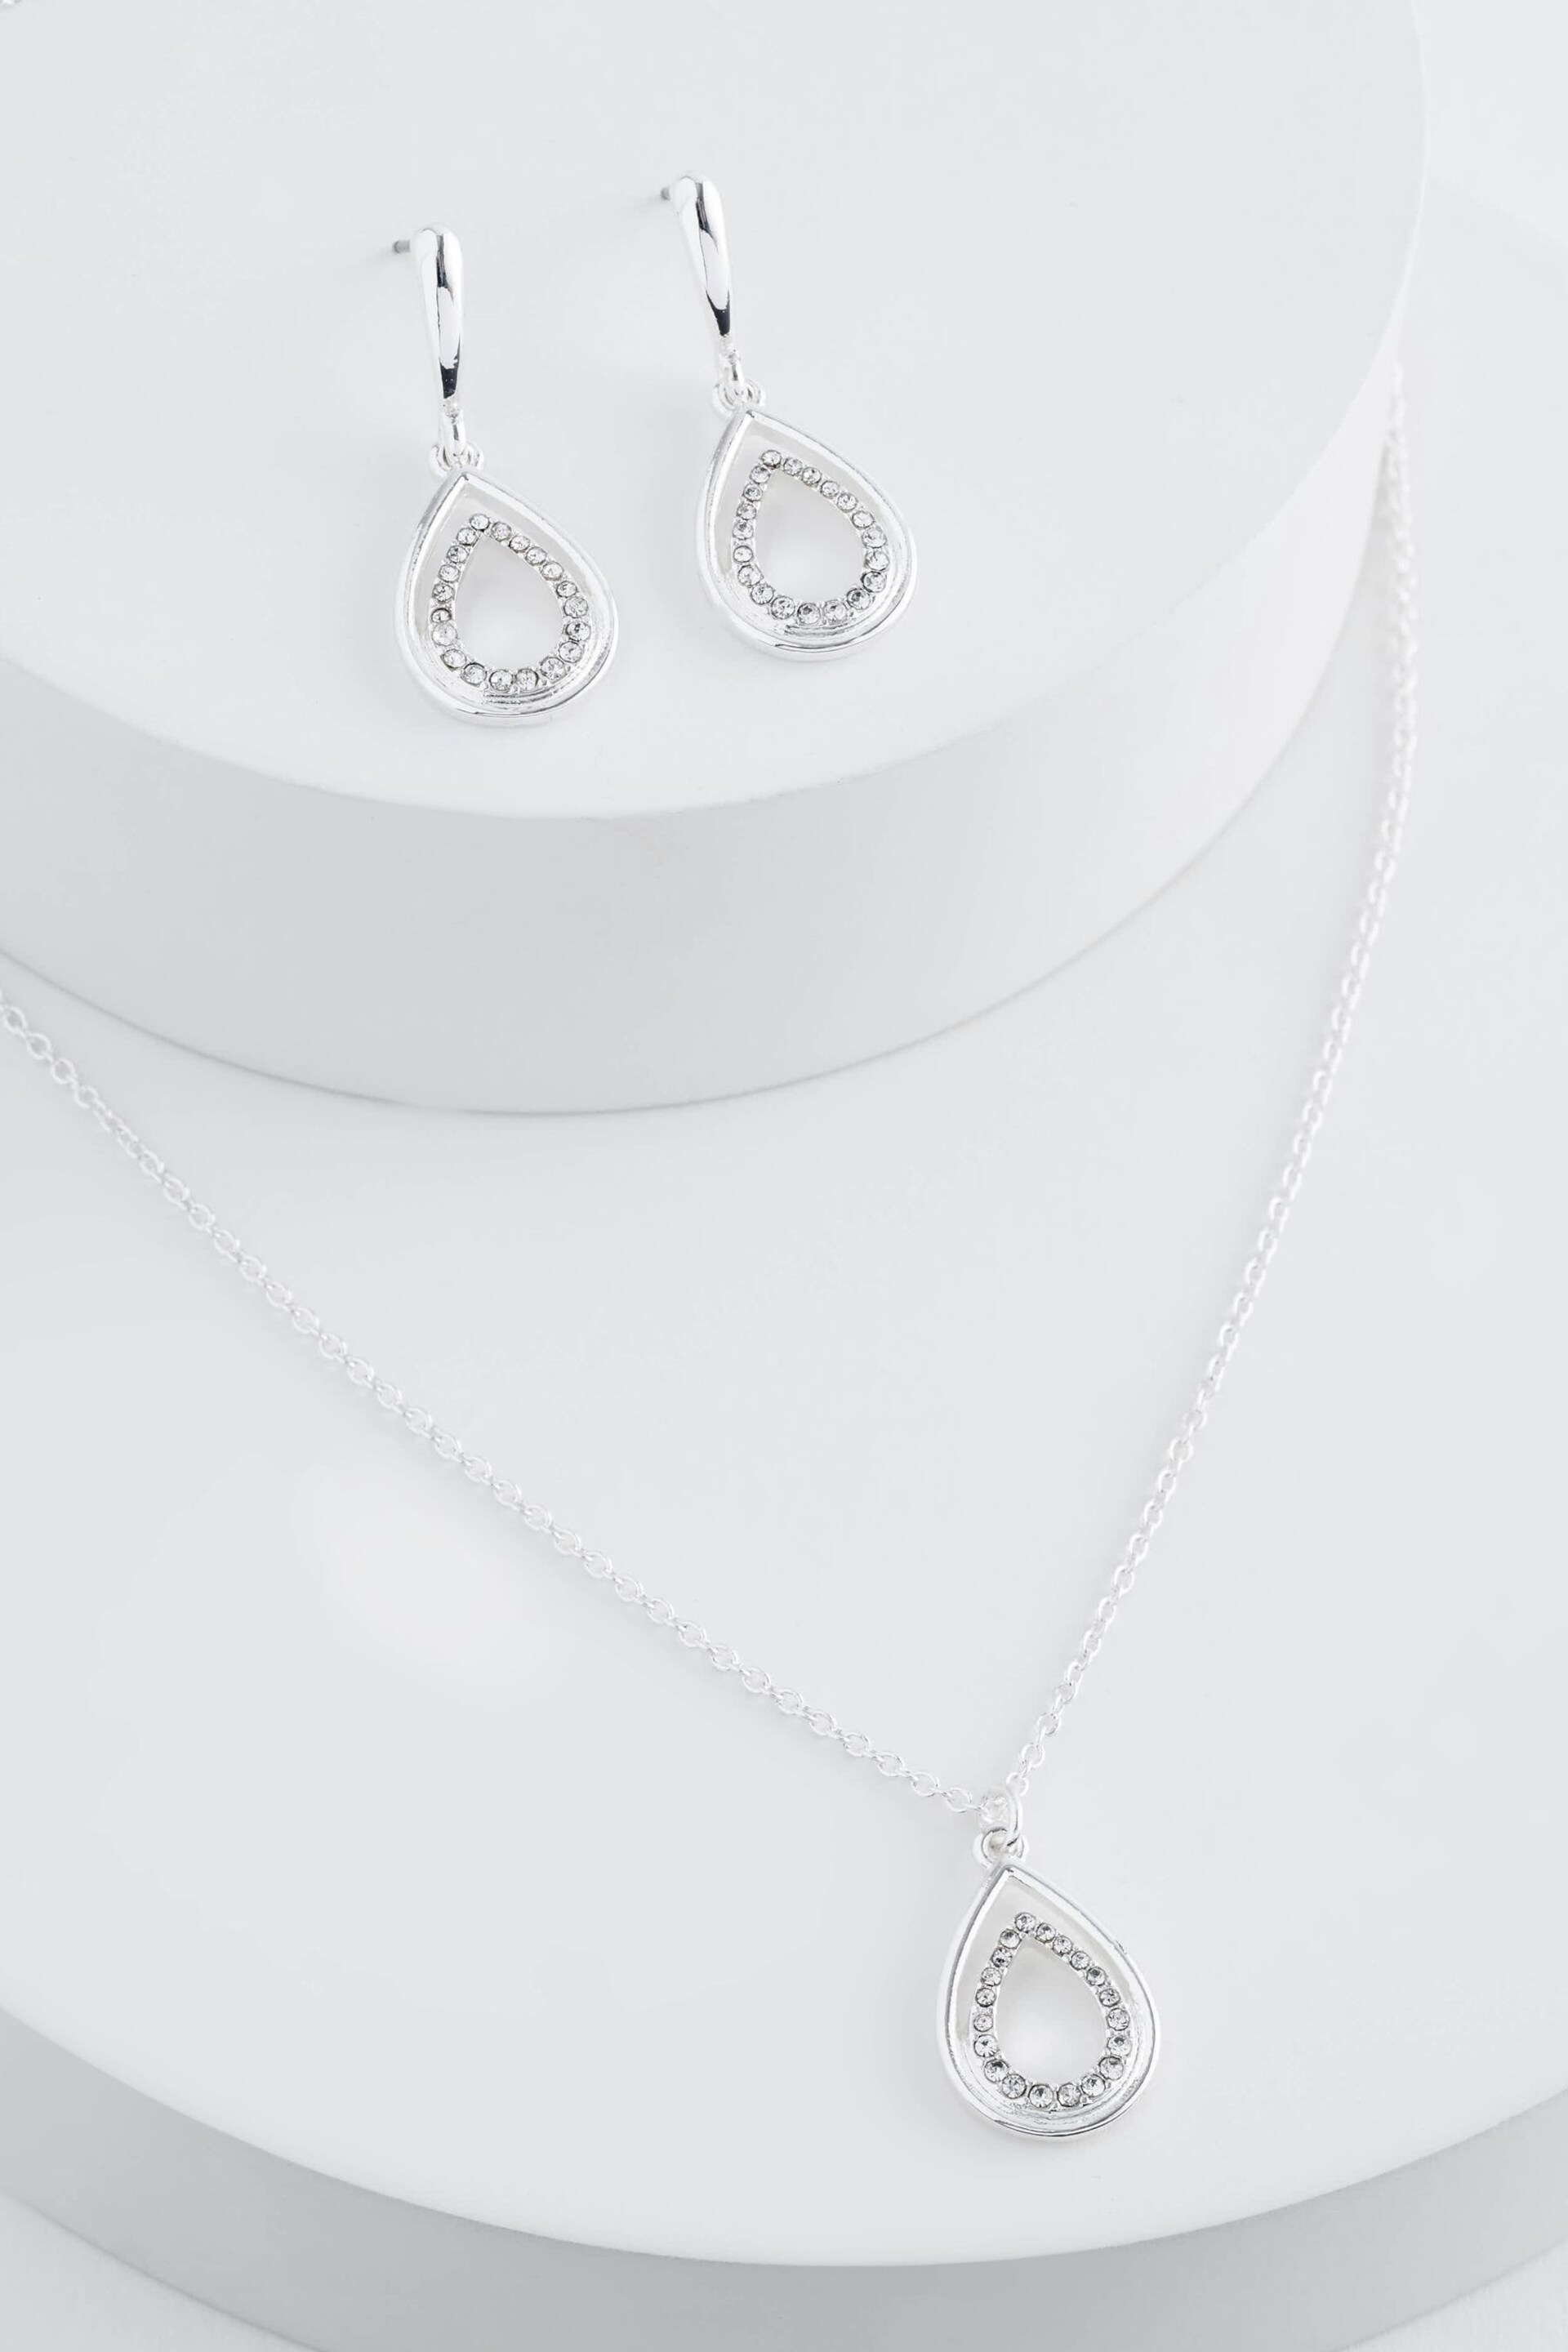 Silver Plated Oval Sparkle Earring and Necklace Set - Image 3 of 3